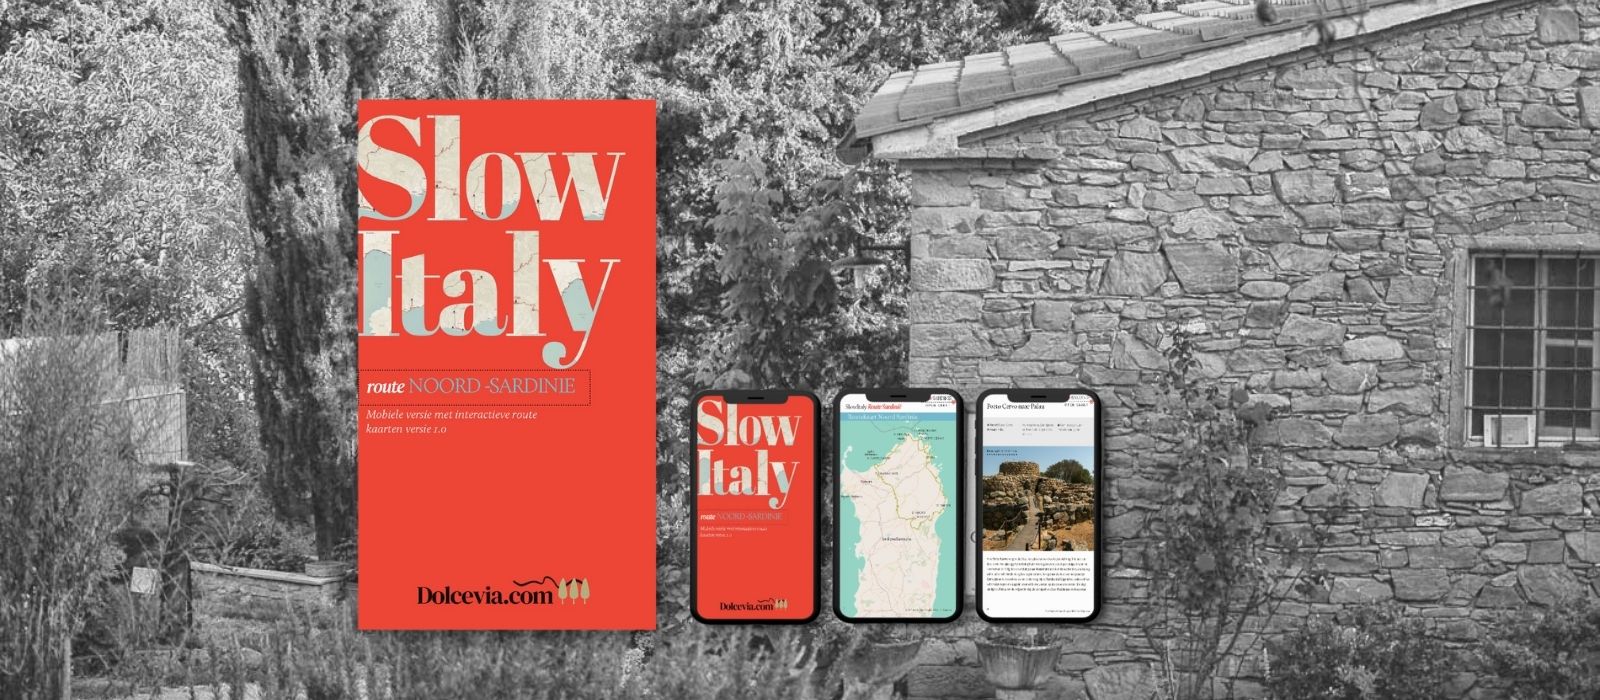 Our most recent publishing project : SlowItaly Noord-Sardinie